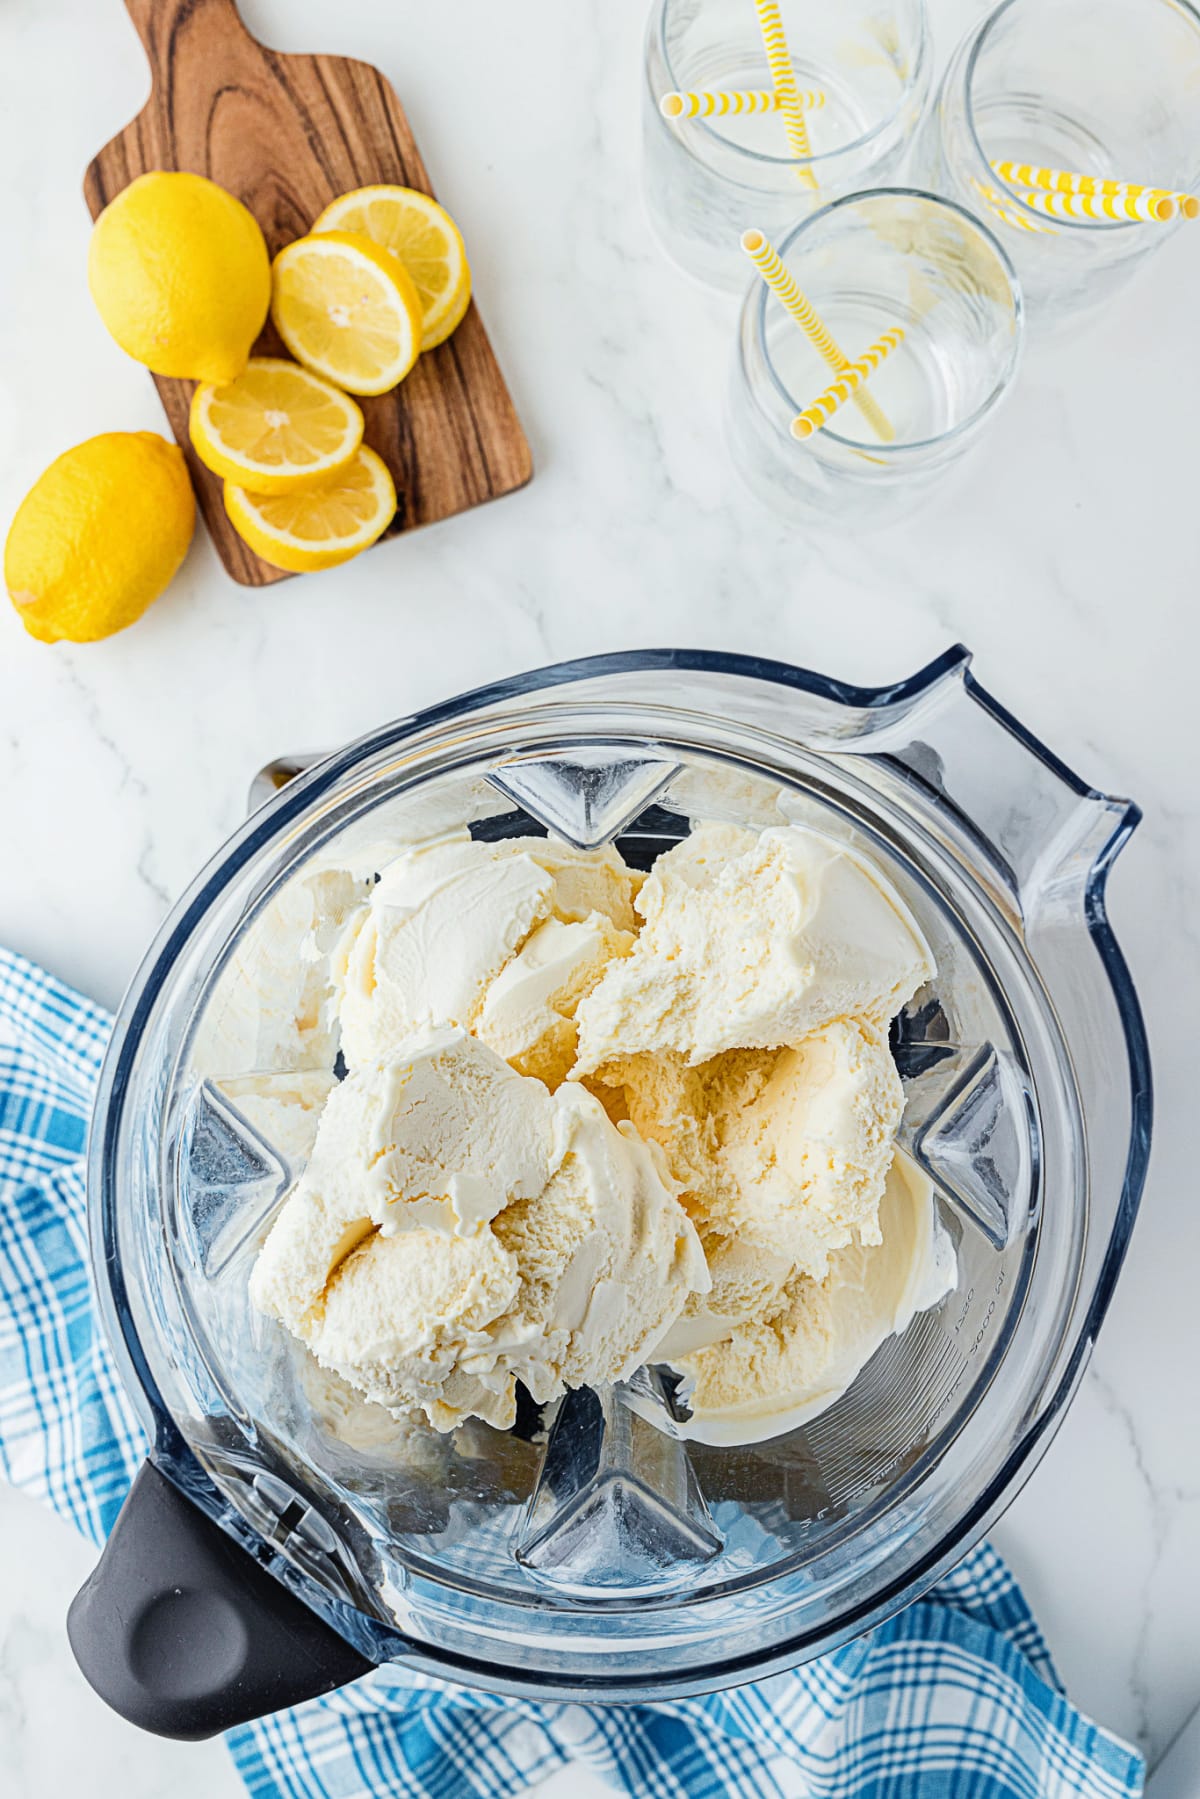 Blender with ice cream in it on a counter with lemons and empty glasses